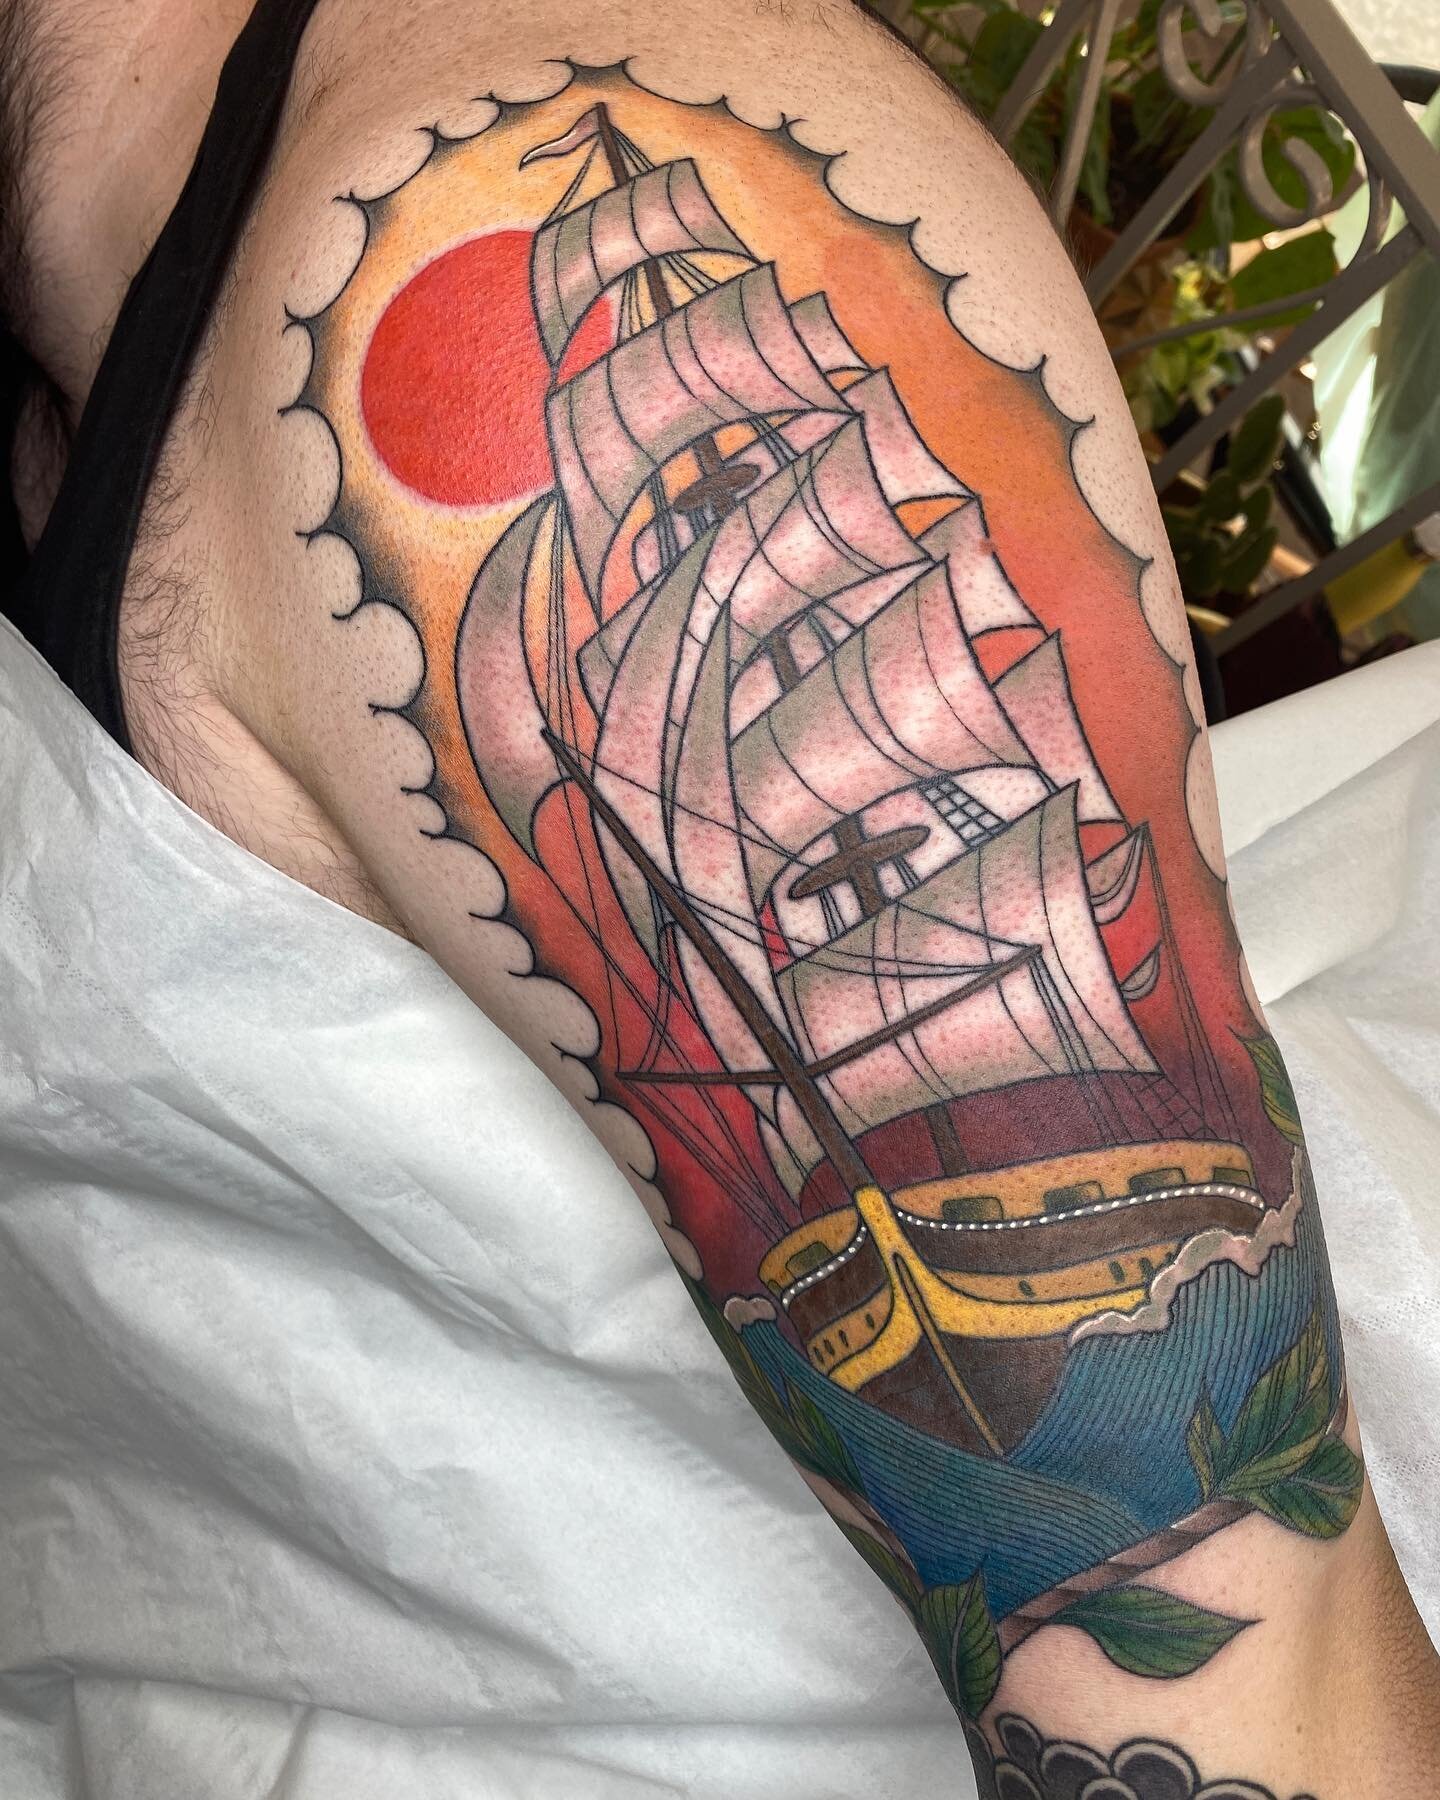 Finished this one up on @nathan.davies2 today. Half healed half fresh! Enjoying this sleeve. 🙌🏻 
Bookings@paulacastle.com #shiptattoo #neotraditionaltattoo #neotrad #neotradeu #neotradtattoo #bristoltattoo #nauticaltattoo